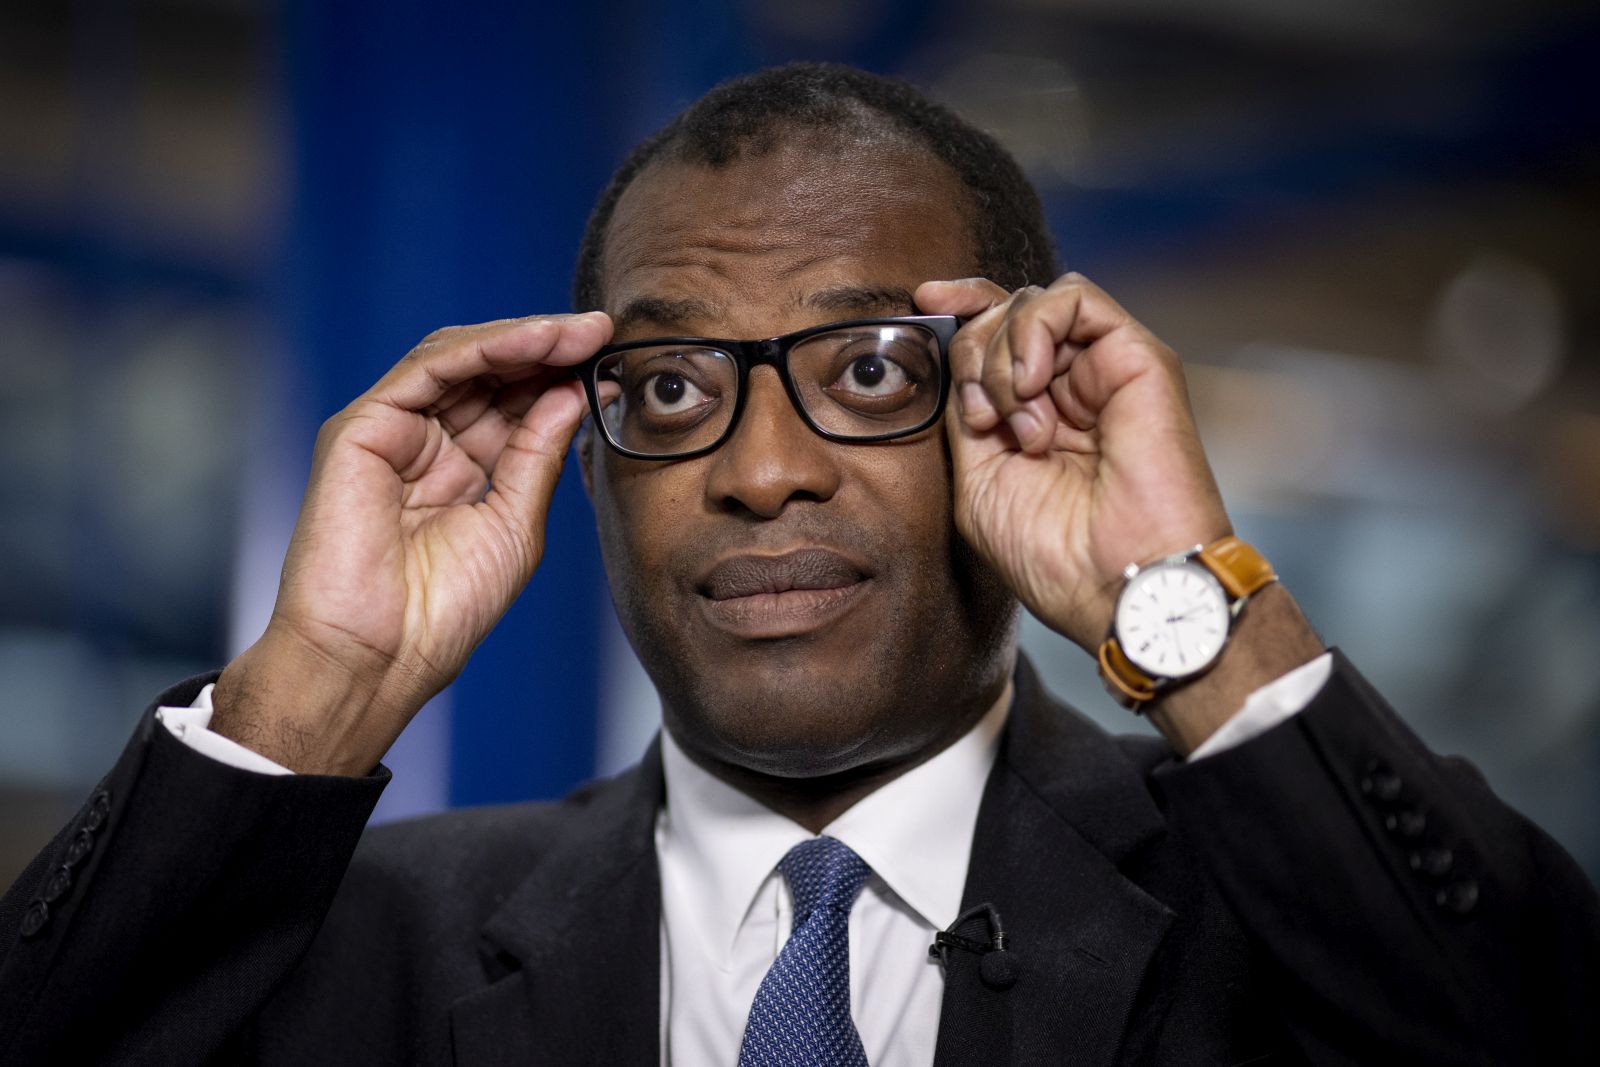 epa10220791 Britain's Chancellor of the Exchequer Kwasi Kwarteng gives an interview at the Conservative Party Conference in Birmingham, Britain, 03 October 2022. The government announced a U-turn on scrapping the 45p tax rate, which is paid by people earning over 150,000 British pound (171,080.80 euro) a year, following a week of market turmoil and the British pound going historic low against the US dollar.  EPA/TOLGA AKMEN